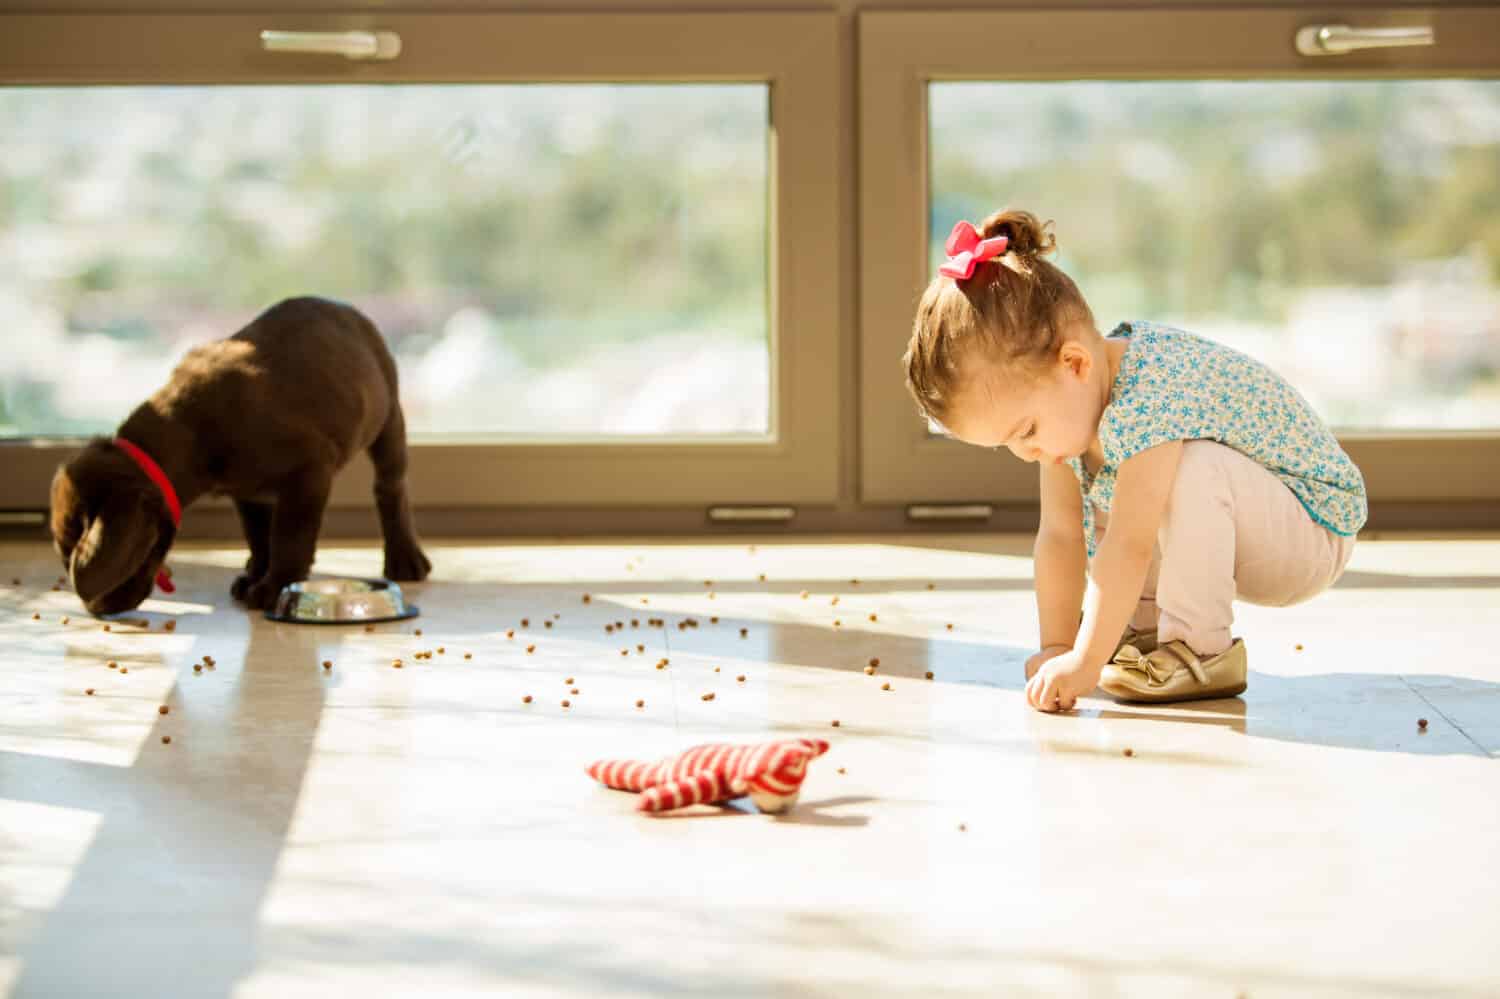 Cute Labrador puppy making a mess with his food while a little girl helps him pick it up